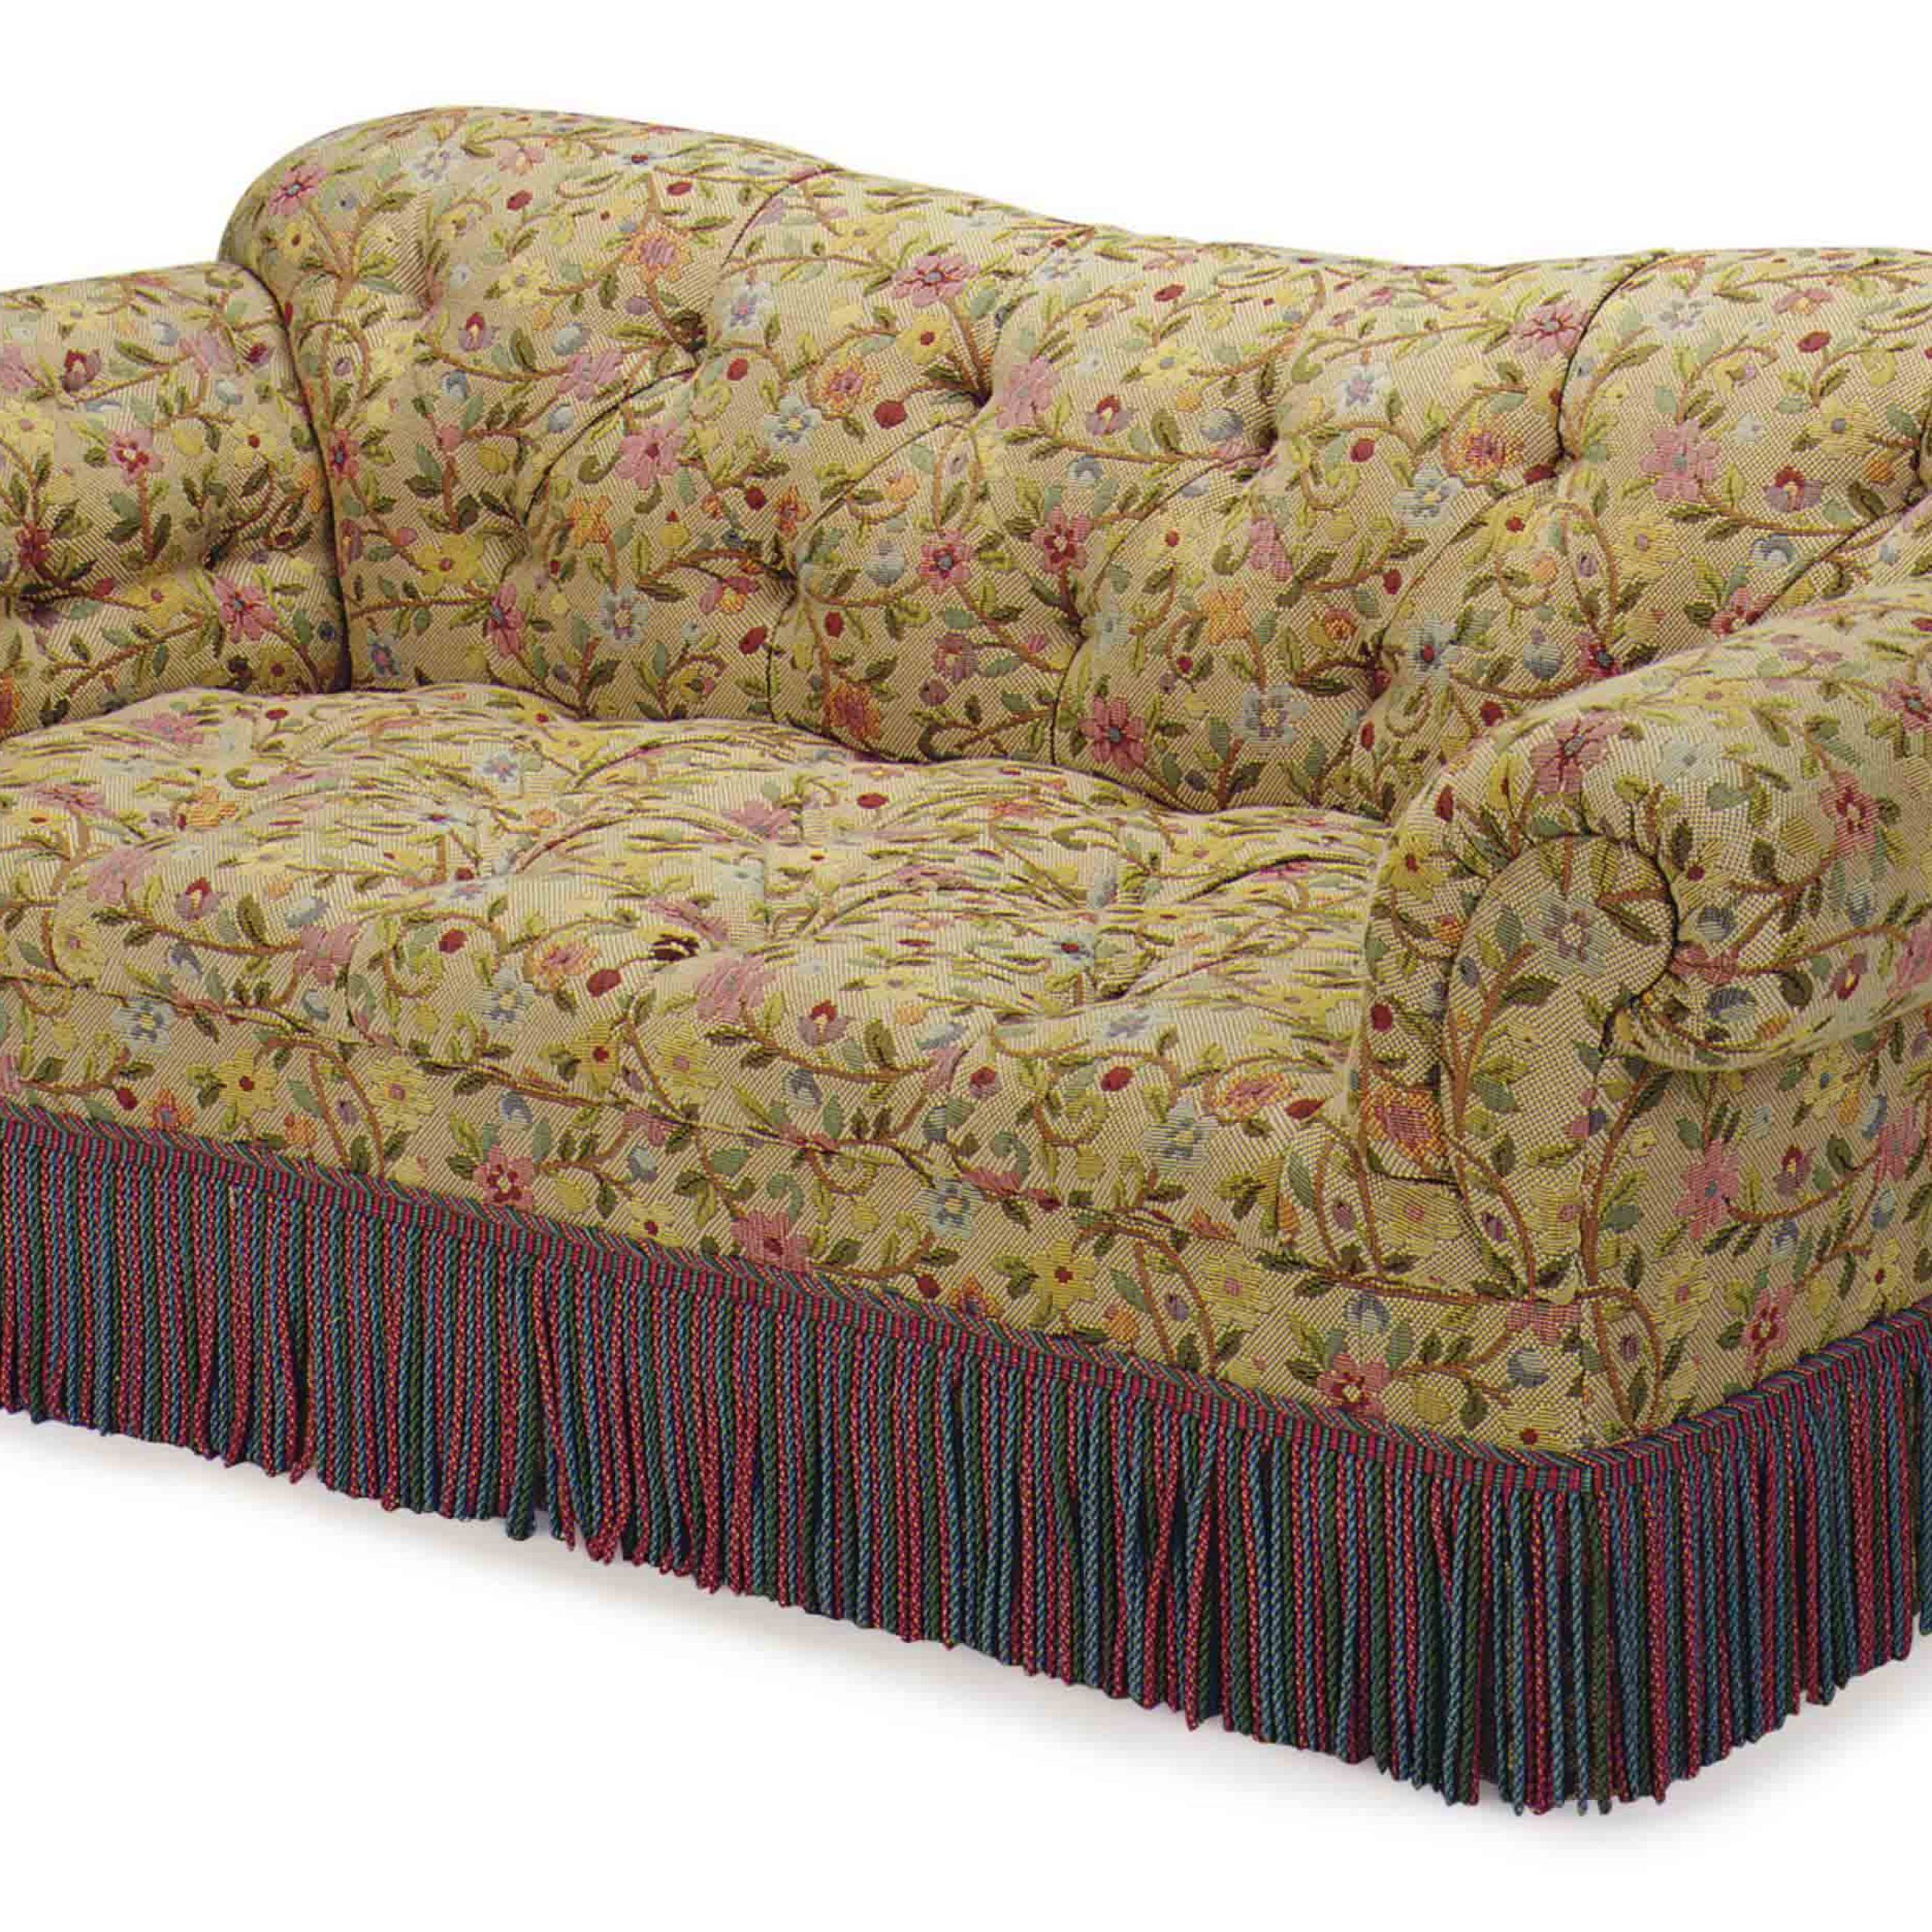 A Button Tufted Floral Pattern Upholstered Sofa, , Late 20th Century Inside Sofas In Pattern (View 11 of 20)